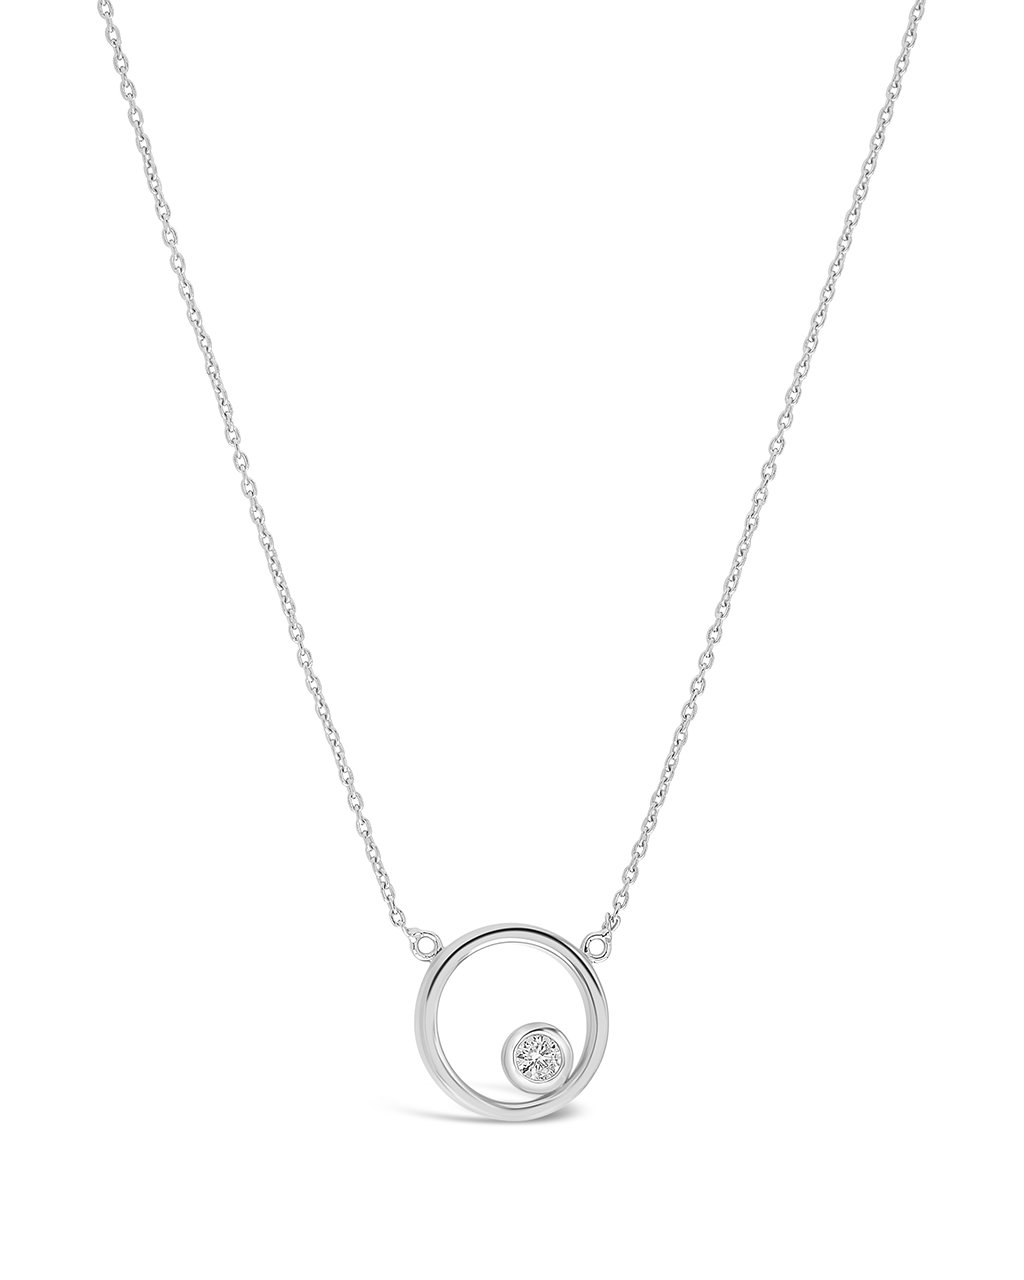 Extra Large Sterling Silver 3 Initials Circle Monogram Pendant Necklace  Jewelry 2 1/2 inch SM47